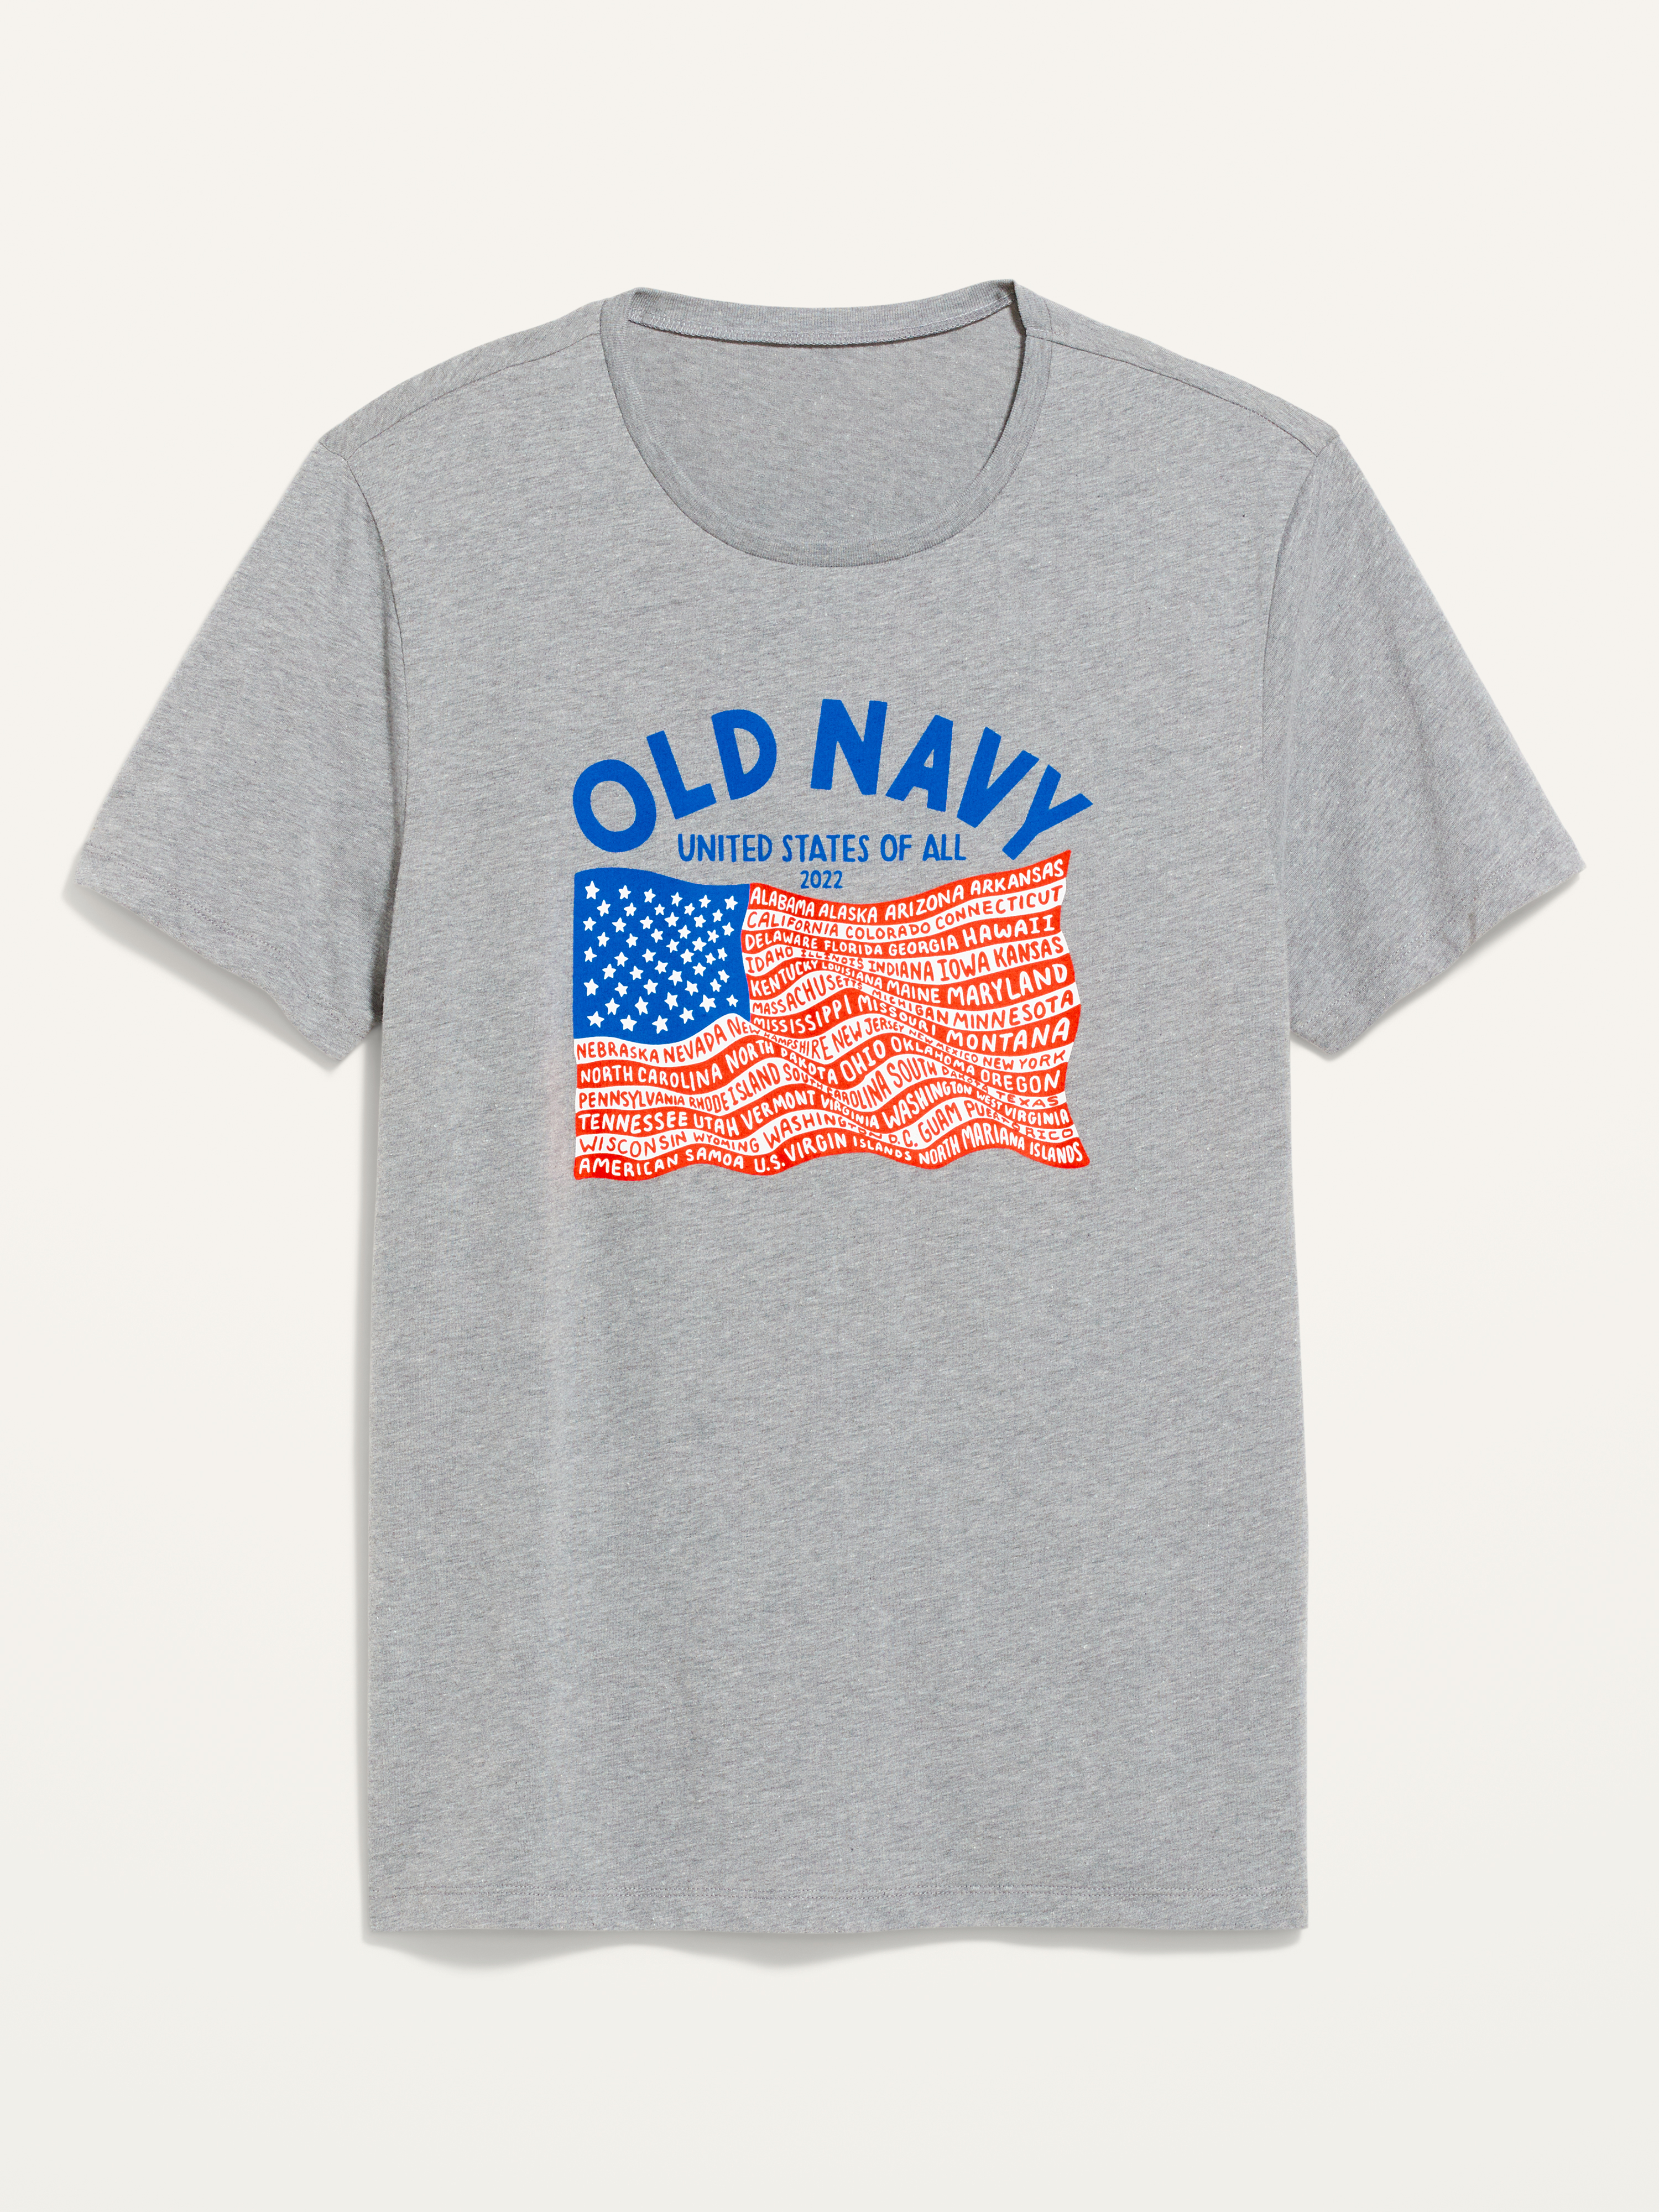 Old Navy selling new purple Fourth of July tees as part of  anti-discrimination campaign